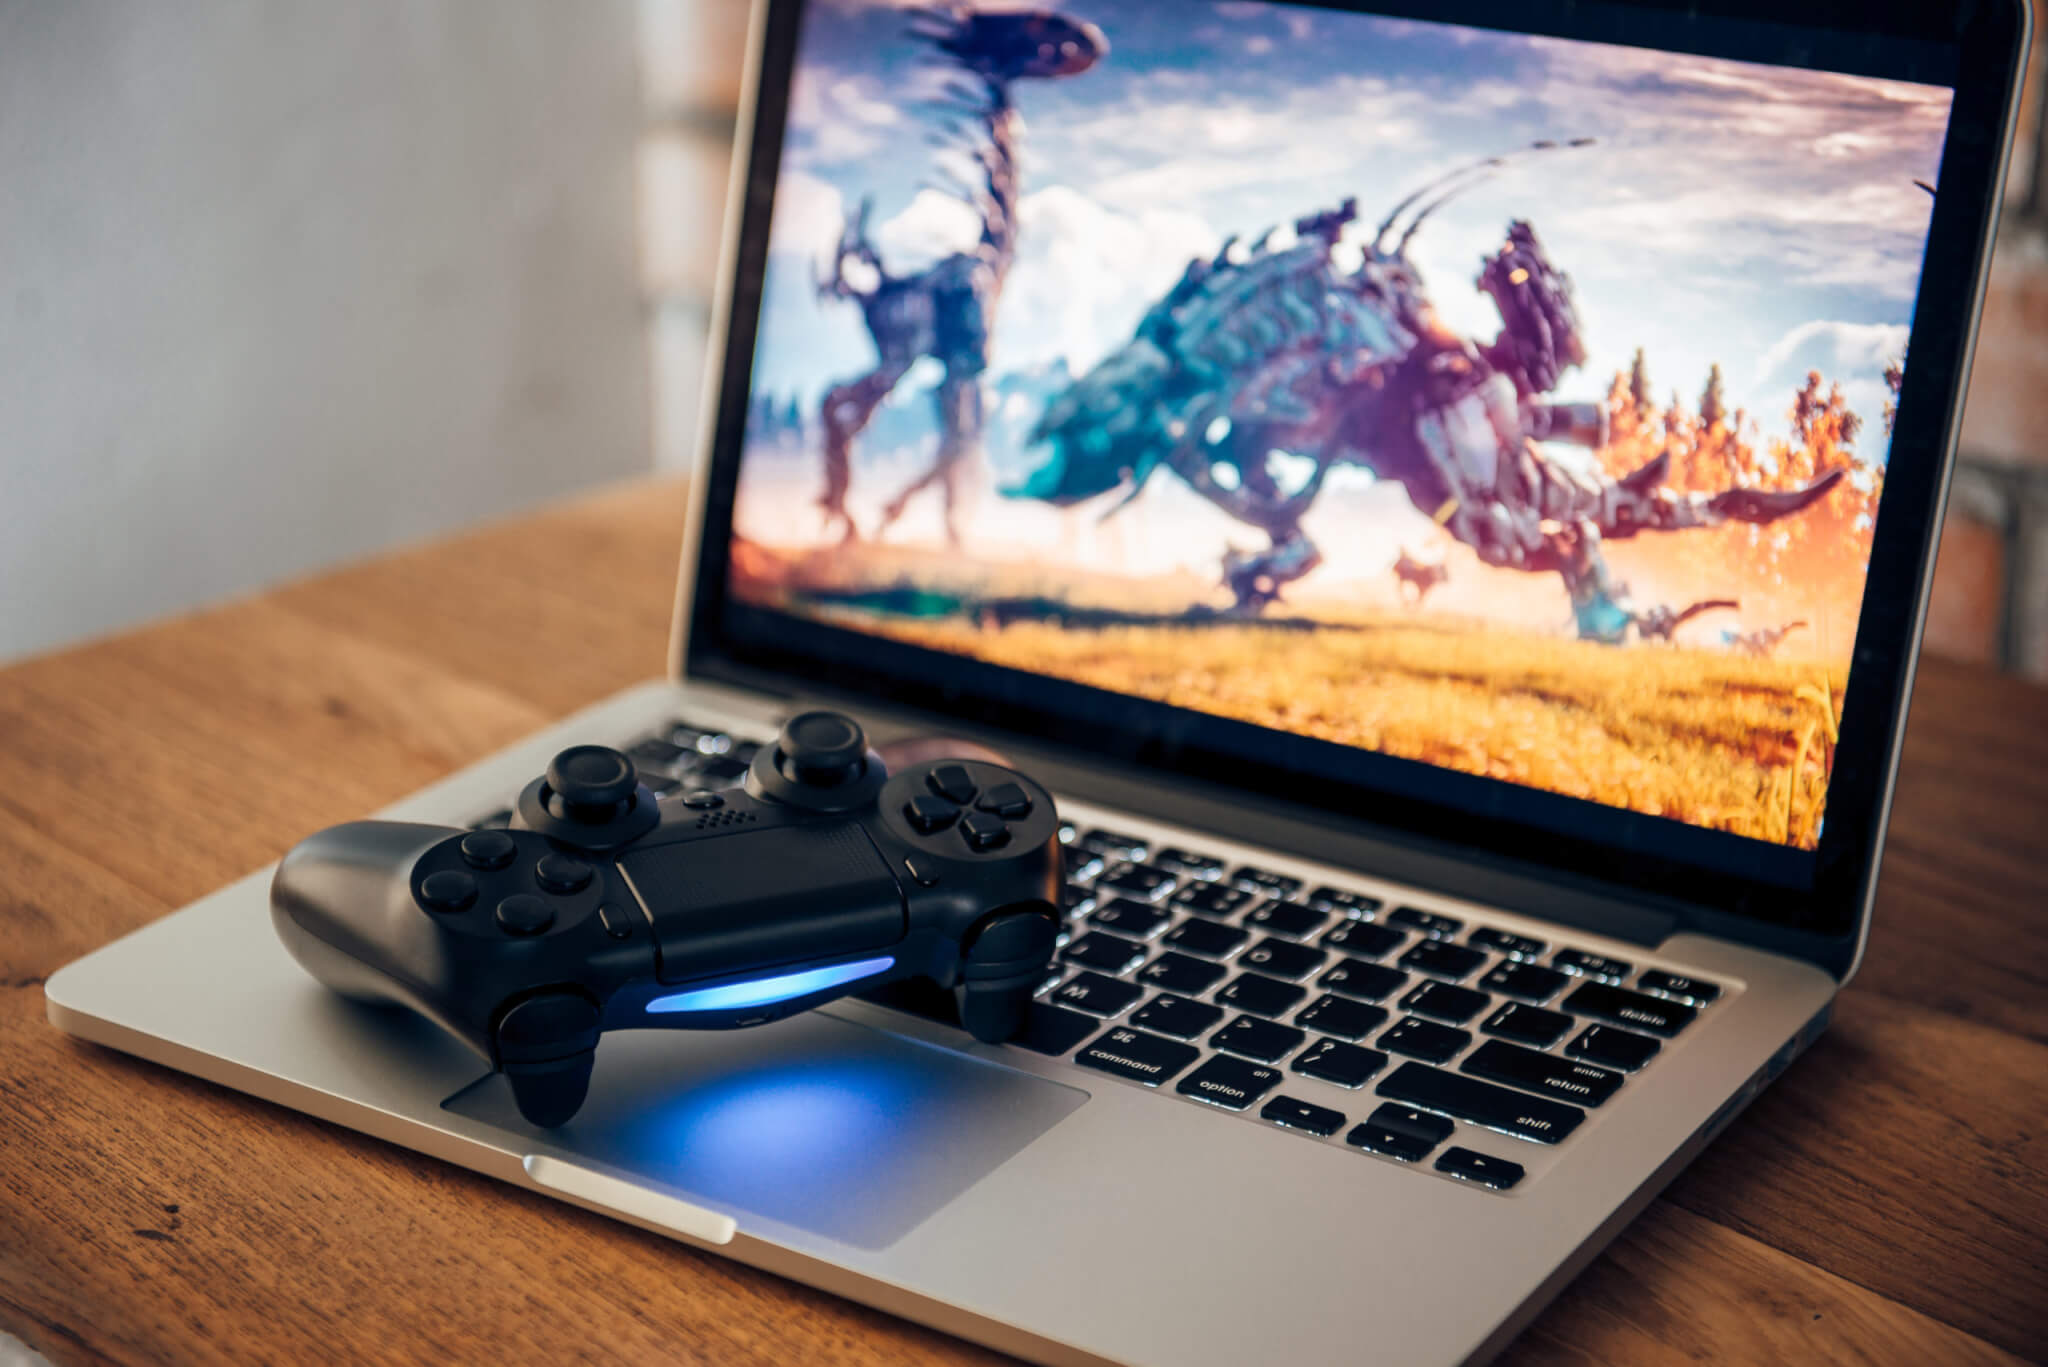 How to Play XBOX Games on Your Gaming PC or Laptop